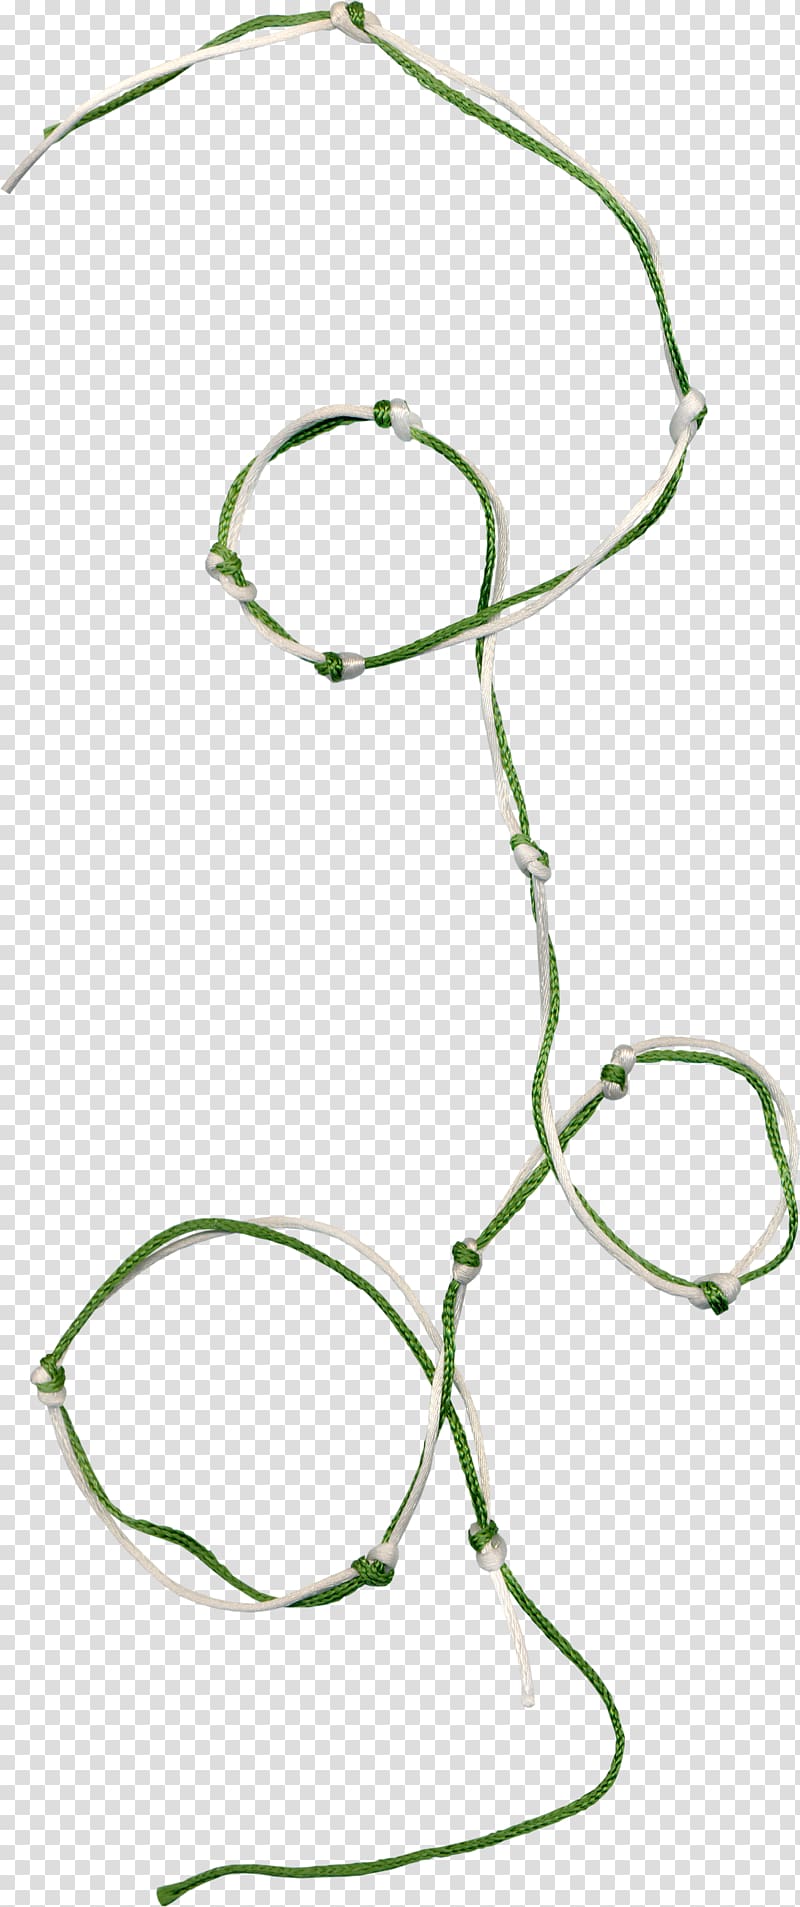 Green White Desktop , Green and white,rope,Decorative background,Shading transparent background PNG clipart